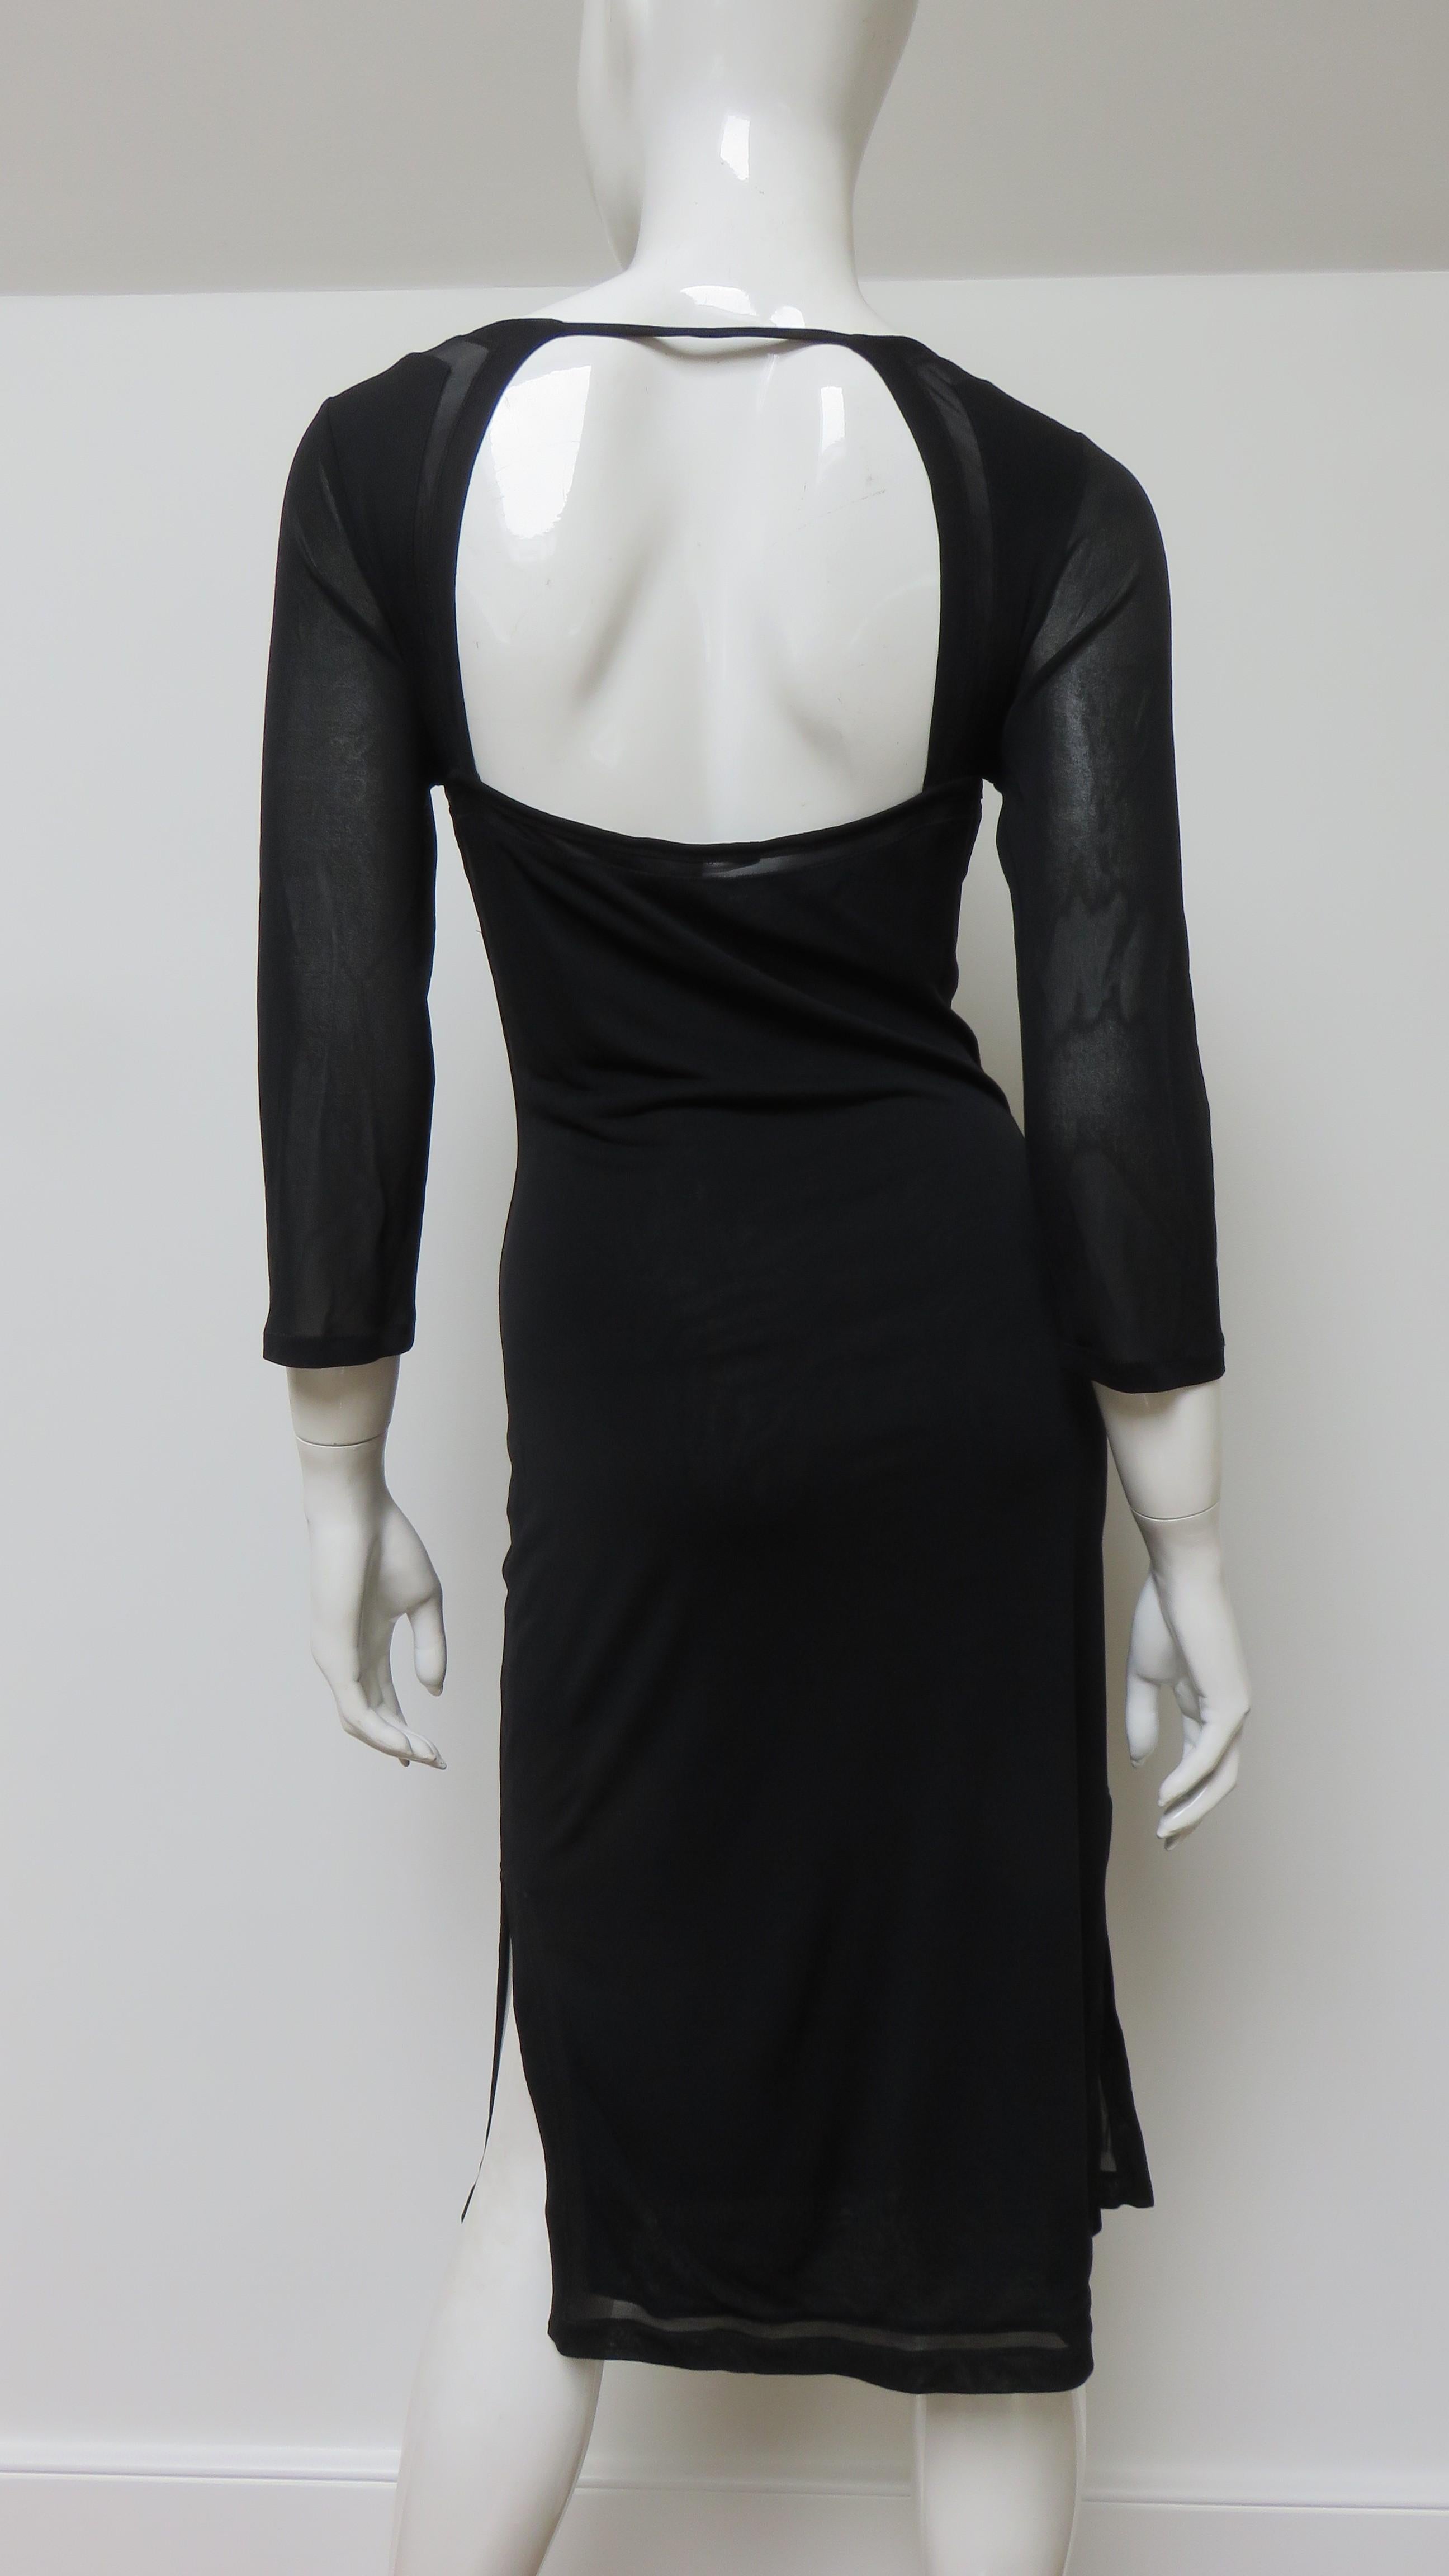 Tom Ford For Gucci Dress with Cut outs For Sale 2